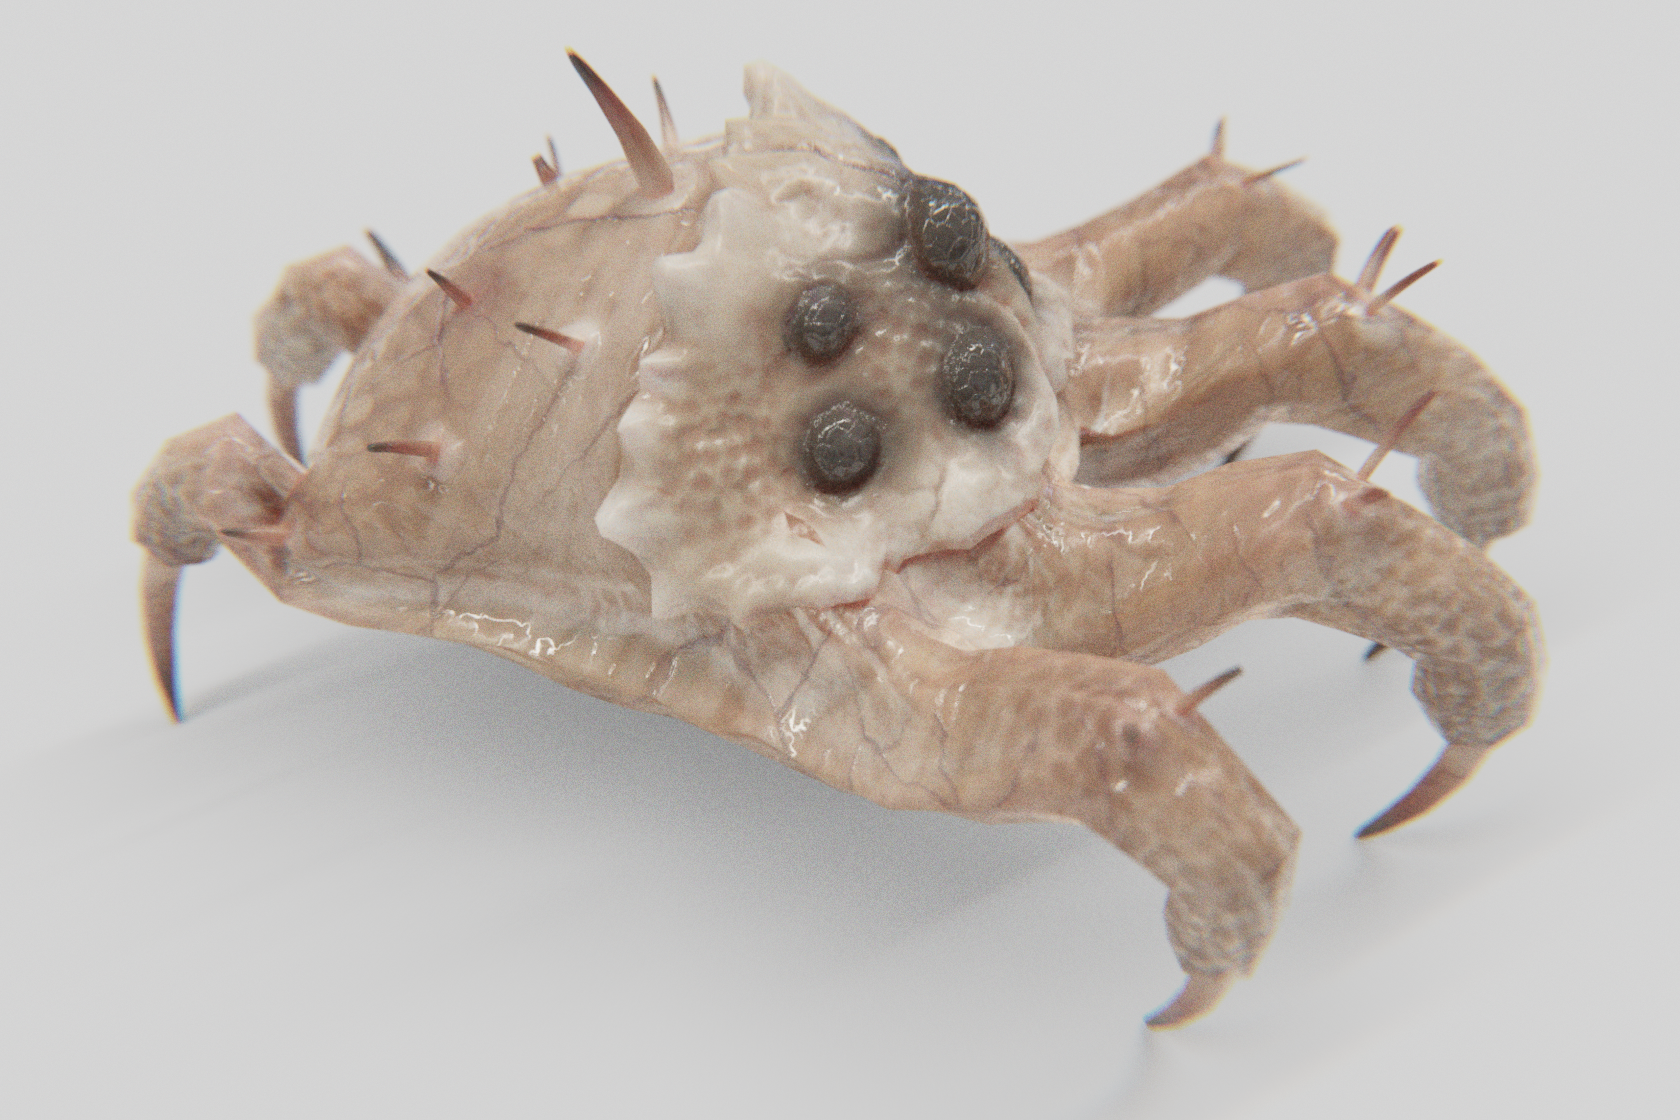 Half Life Headcrab Creature Kranion Soldier - Basic View - 3d Model of Facehugger or Headcrab